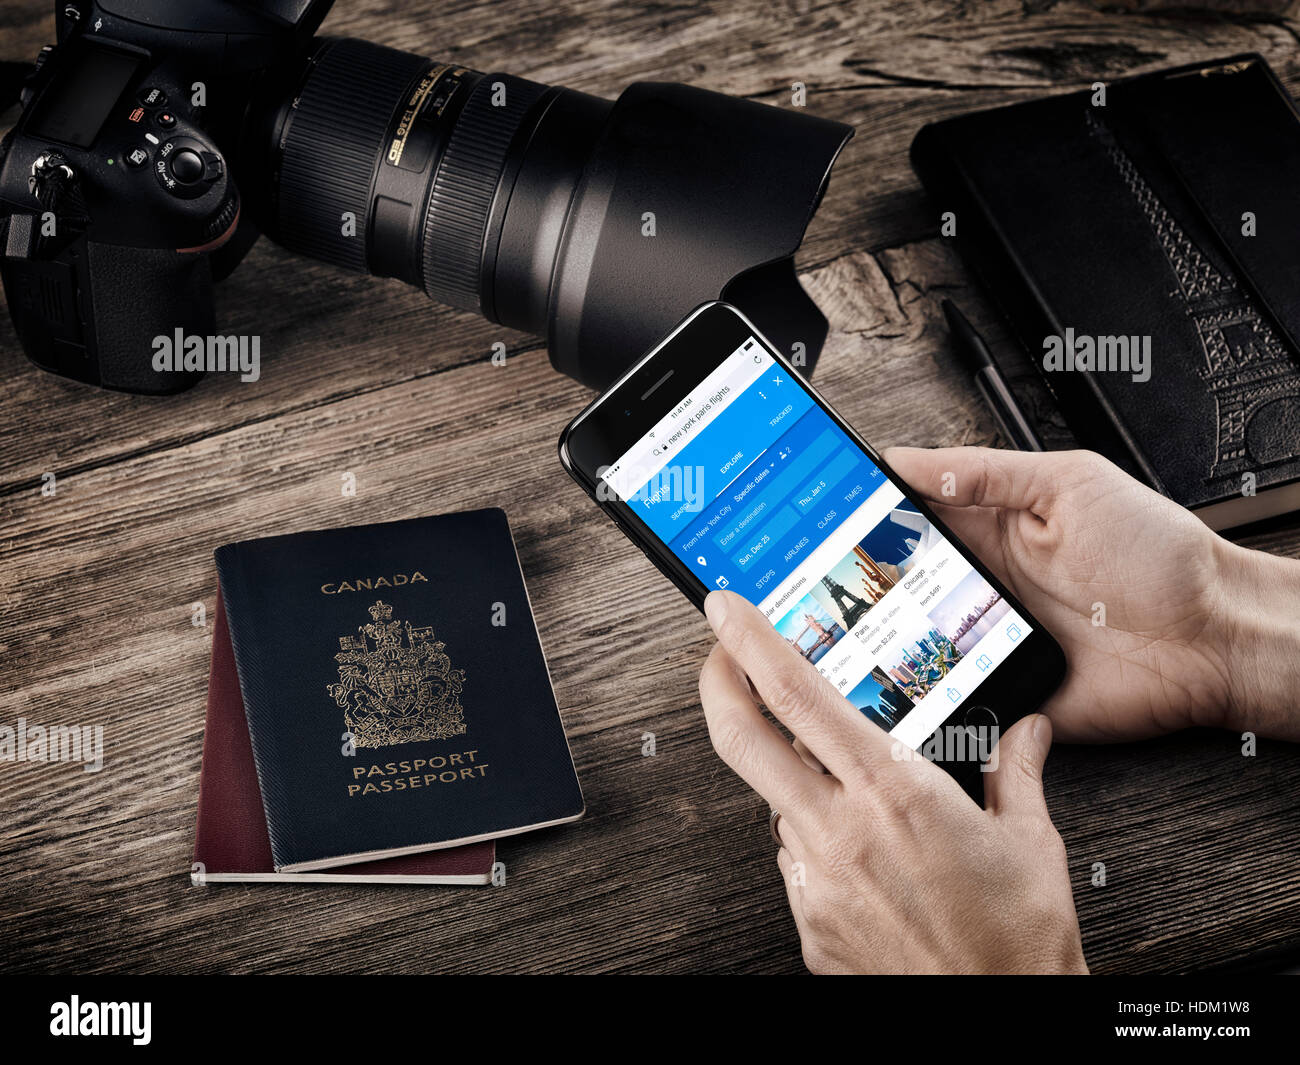 Woman hands with Apple iPhone 7 displaying flight information on a table with passports, a camera and a notebook, traveling conceptual still life Stock Photo